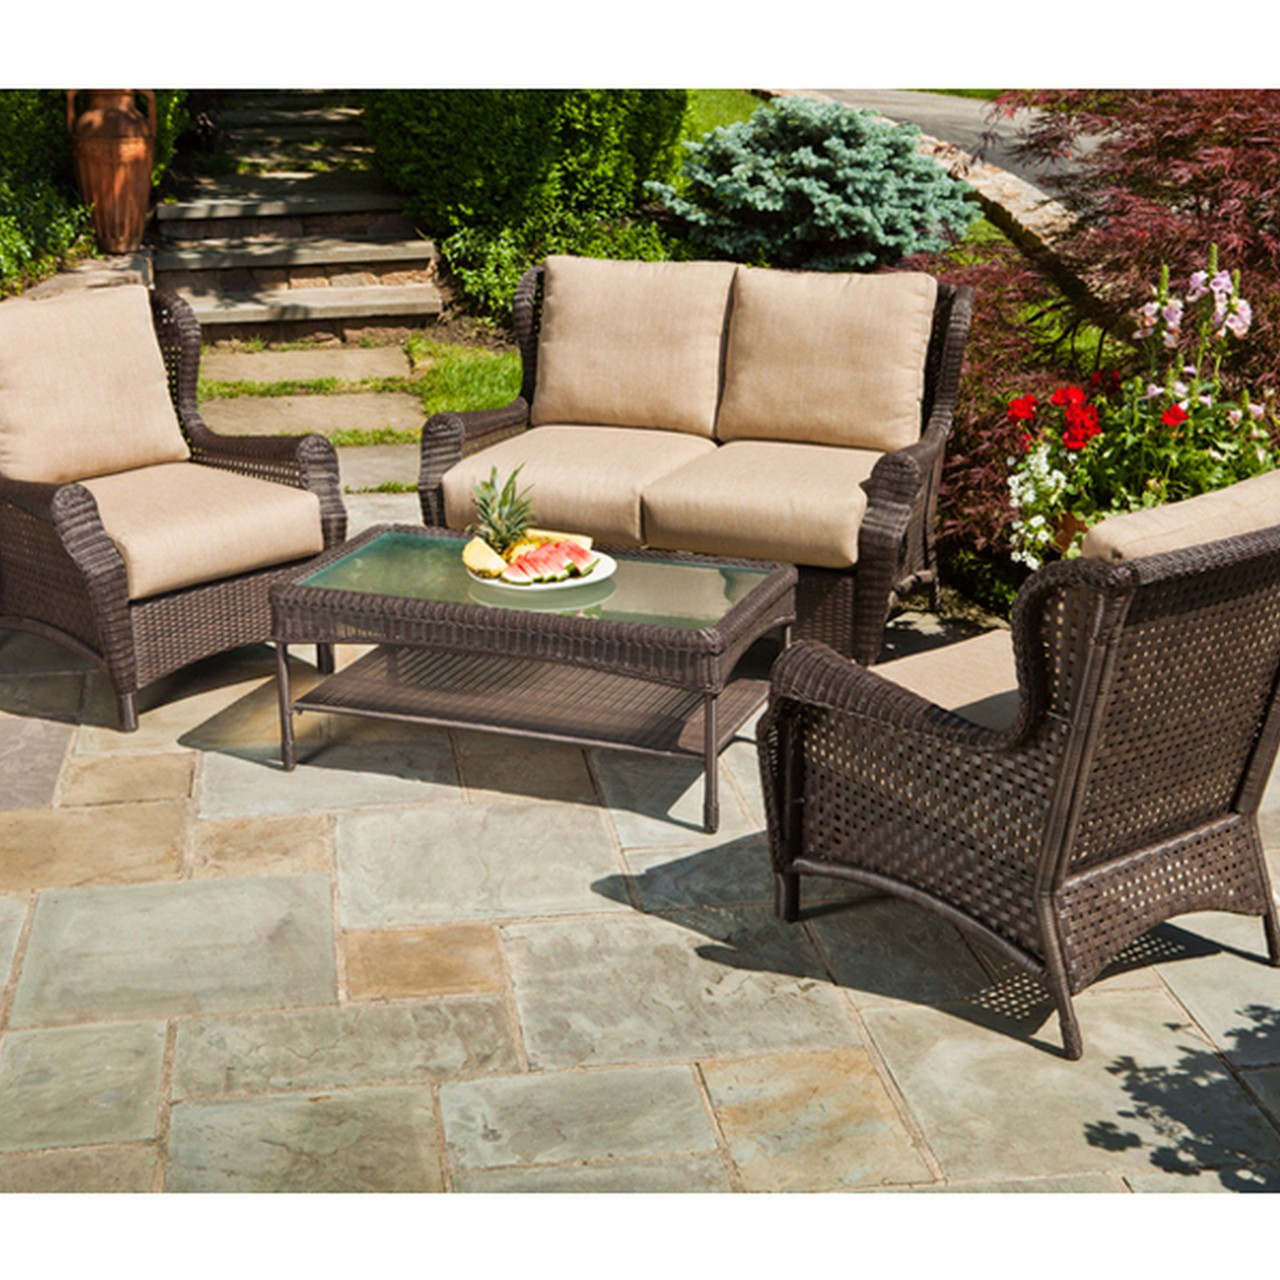 Best ideas about Lazy Boy Patio Furniture
. Save or Pin Lay Z Boy Patio Furniture Luxury Lazy Boy Patio Now.